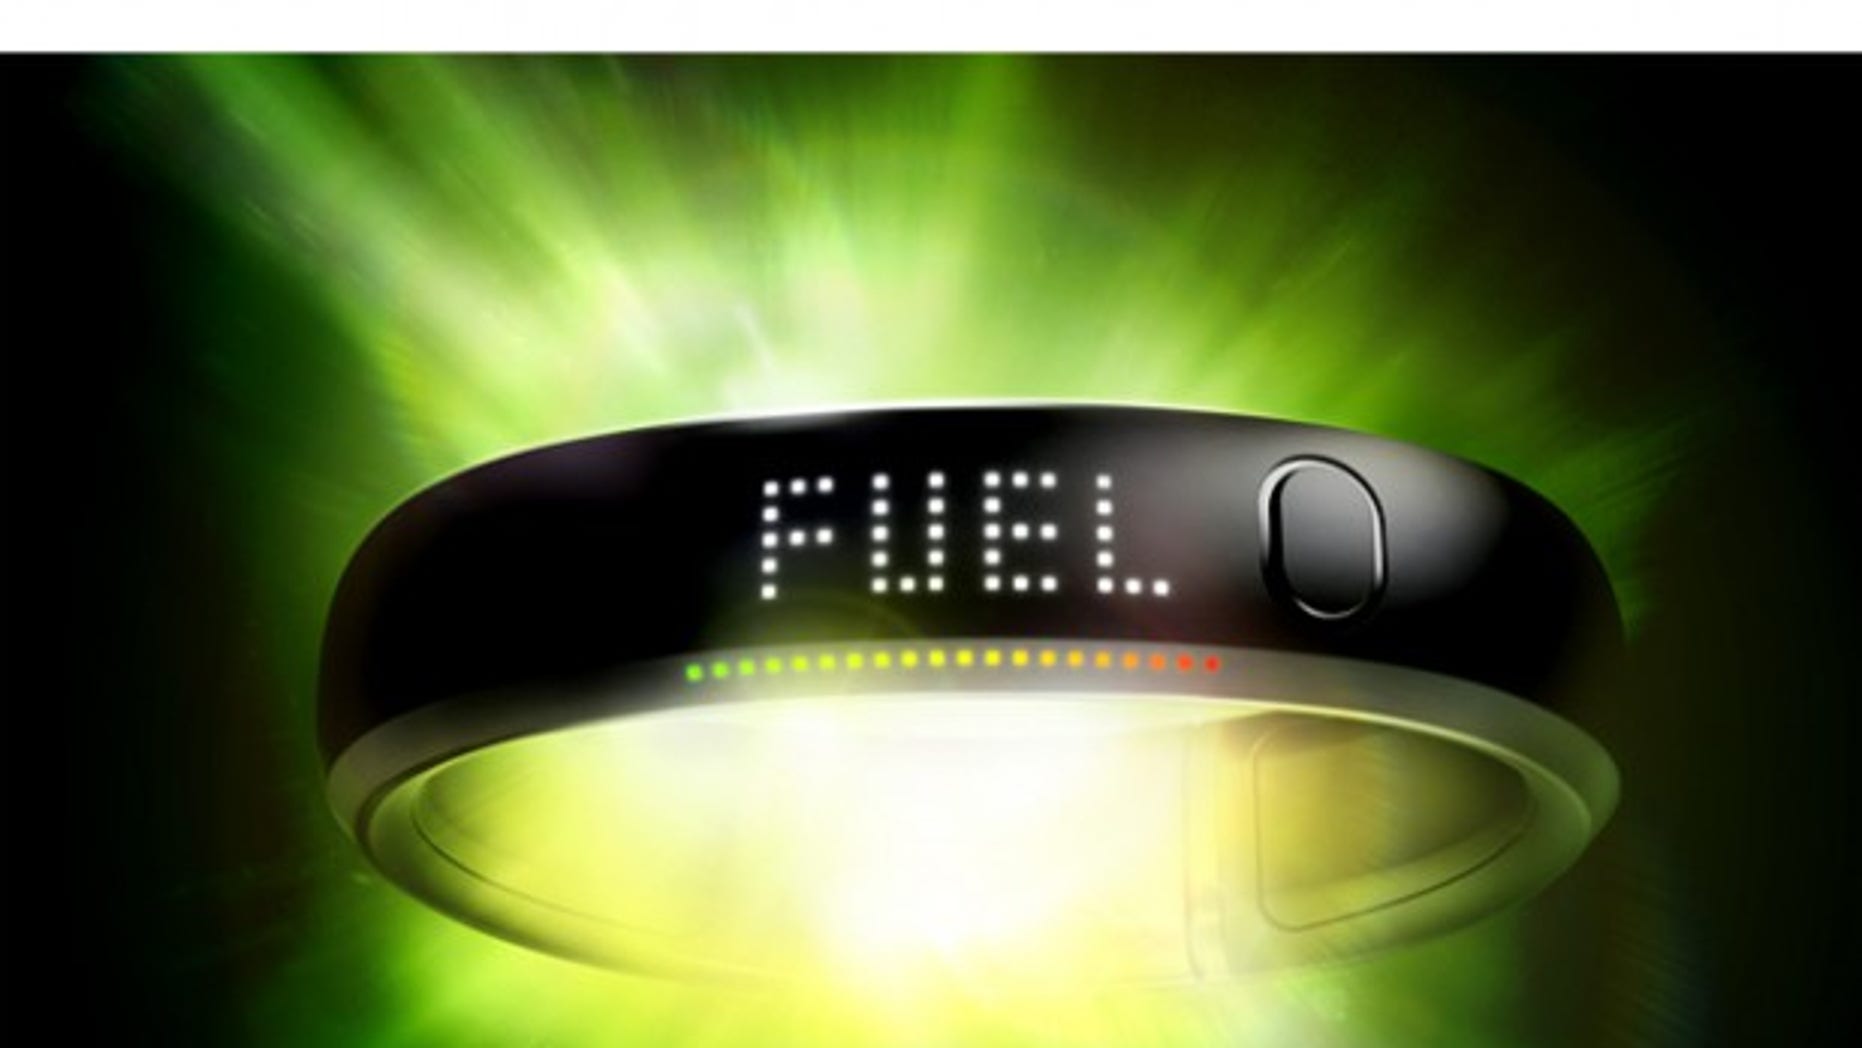 download nike+ fuelband stores